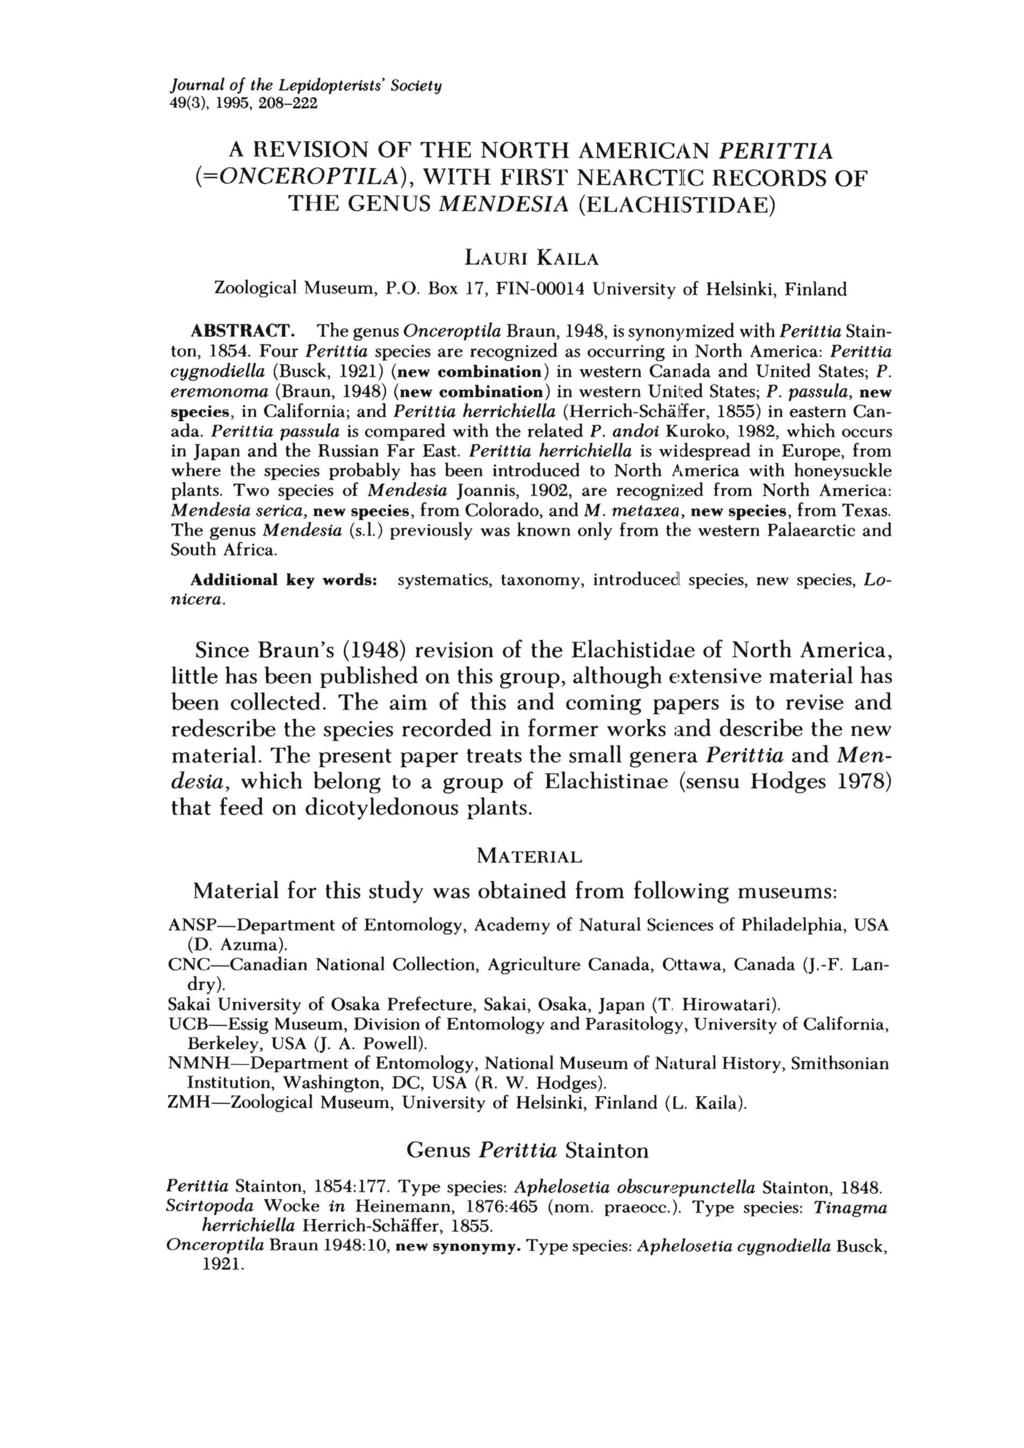 Journal of the Lepidopterists' SOciety 49(3), 1995, 208-222 A REVISION OF THE NORTH AMERICAN PERITTIA (=ONCEROPTILA), WITH FIRST NEARCTllC RECORDS OF THE GENUS MENDESIA (ELACHISTIDAE) LA URI KAlLA